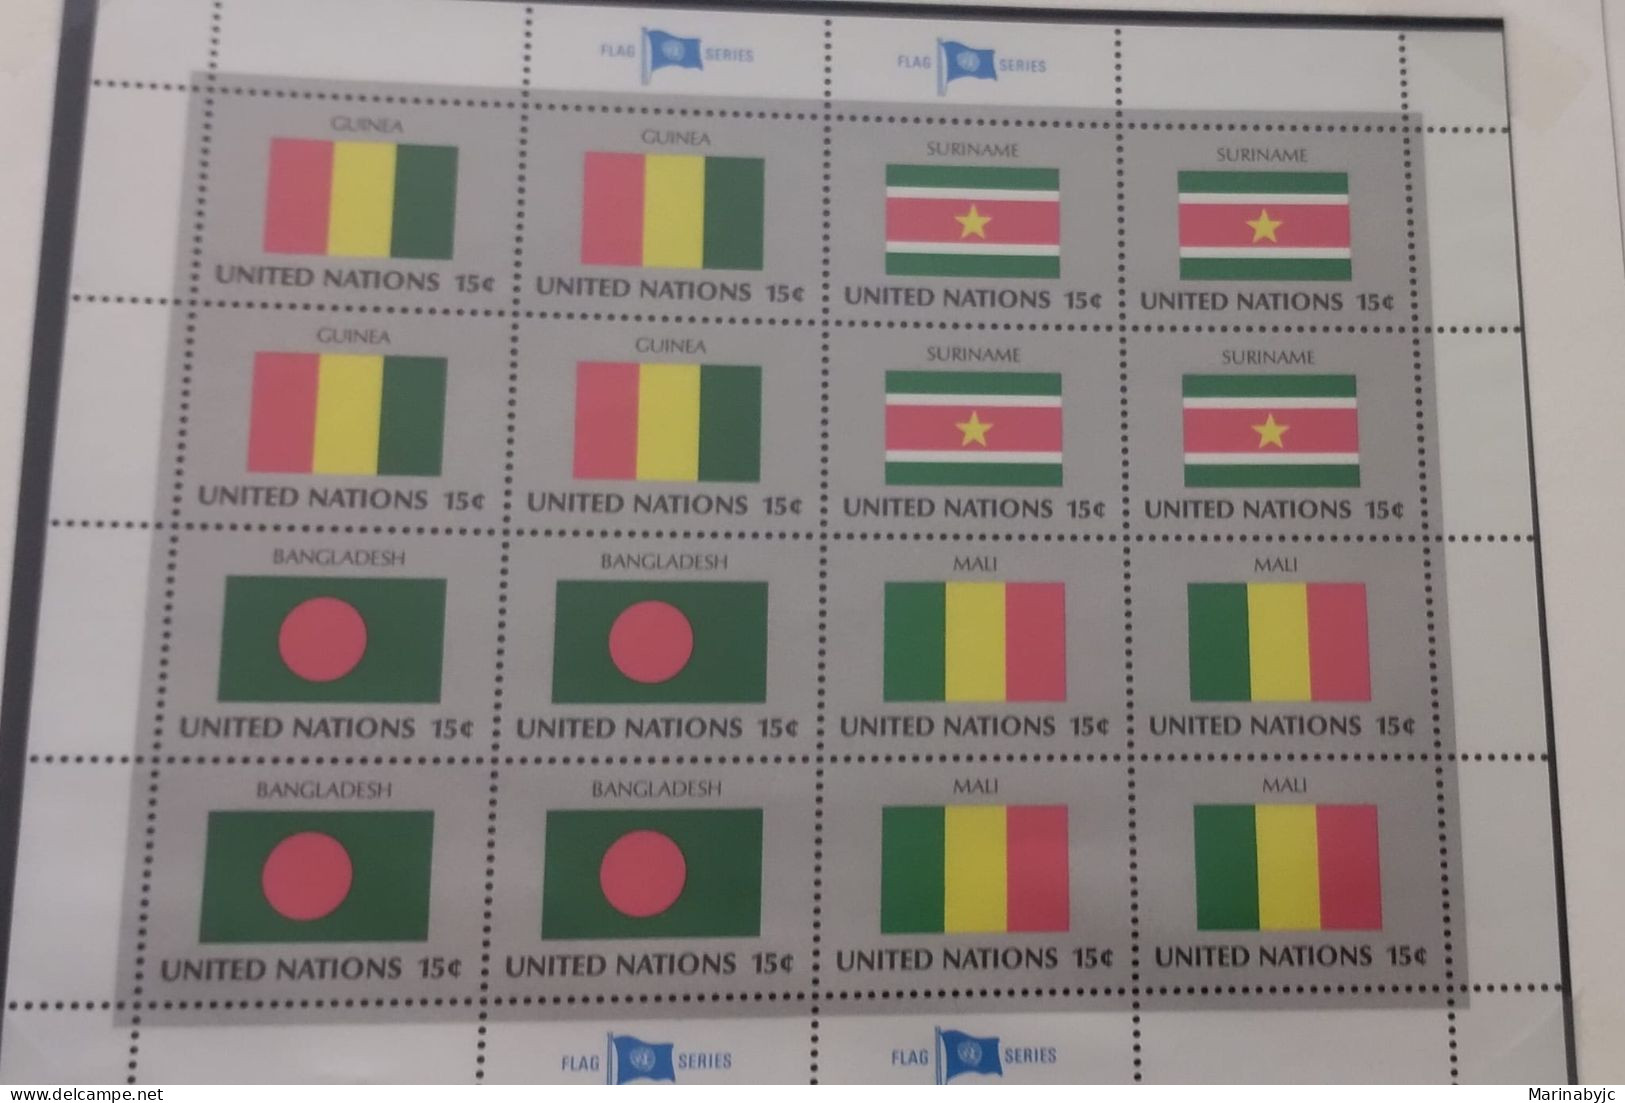 EL)1980 UNITED NATIONS, NATIONAL FLAG OF THE MEMBER COUNTRIES, GUINEA, SURINAME, BANGLADESH, MALI, UNICEF, MINISHEET OF - Ungebraucht